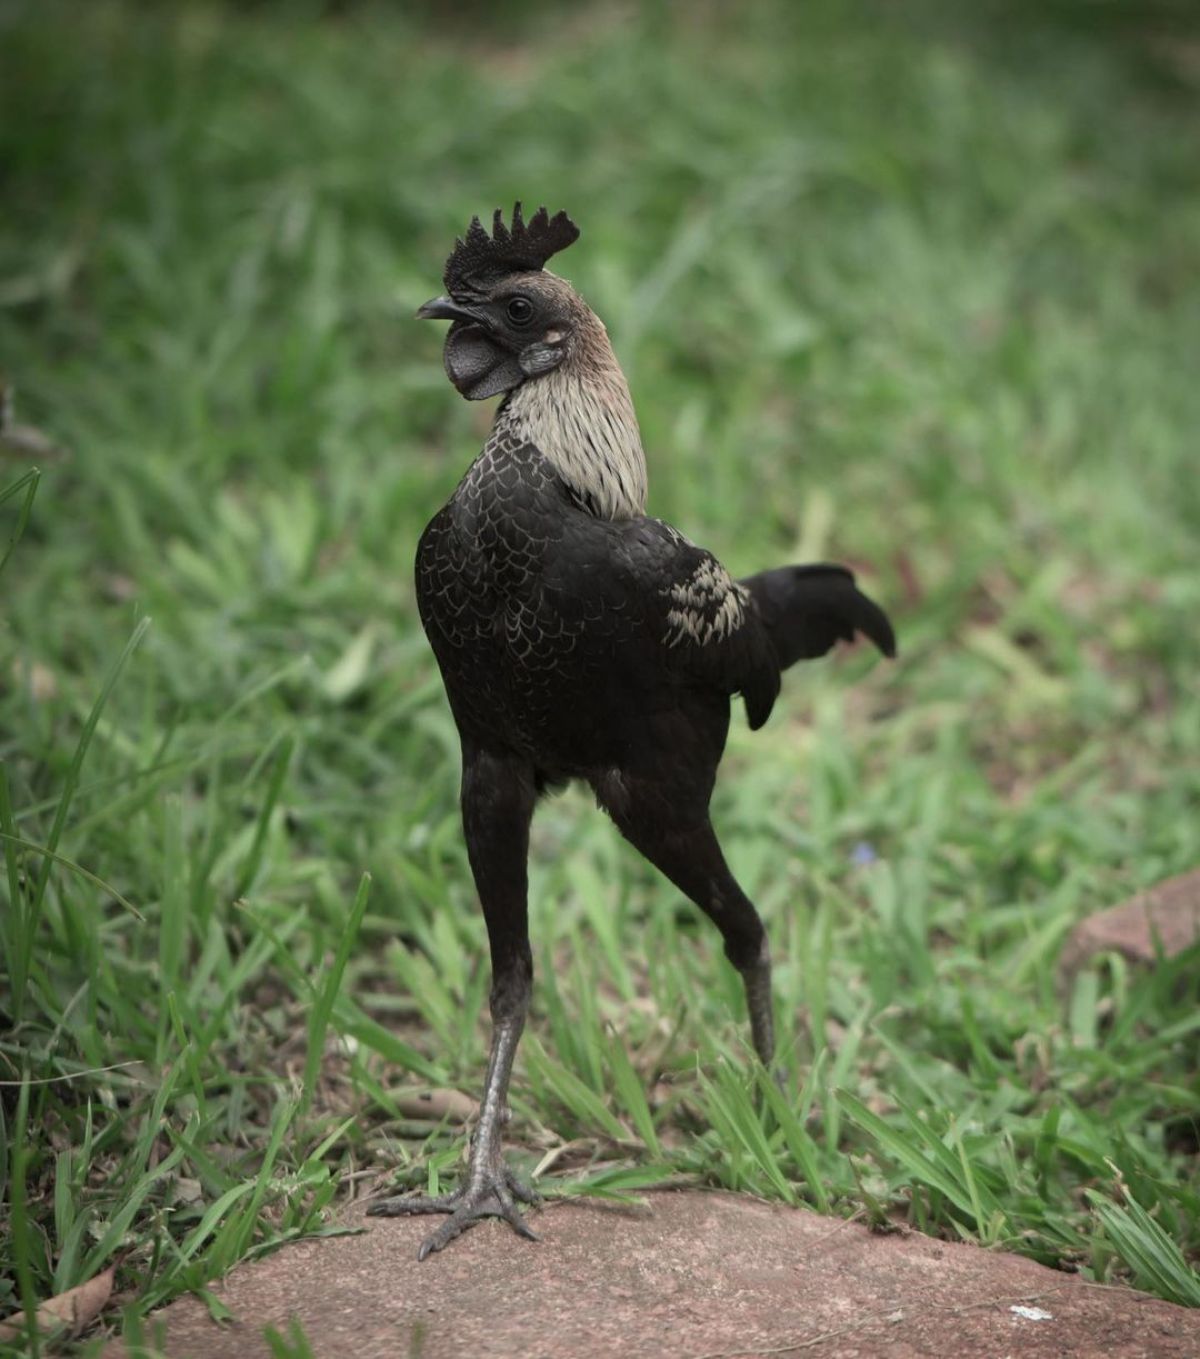 An adorable black Modern Game rooster wandering in a backyard.